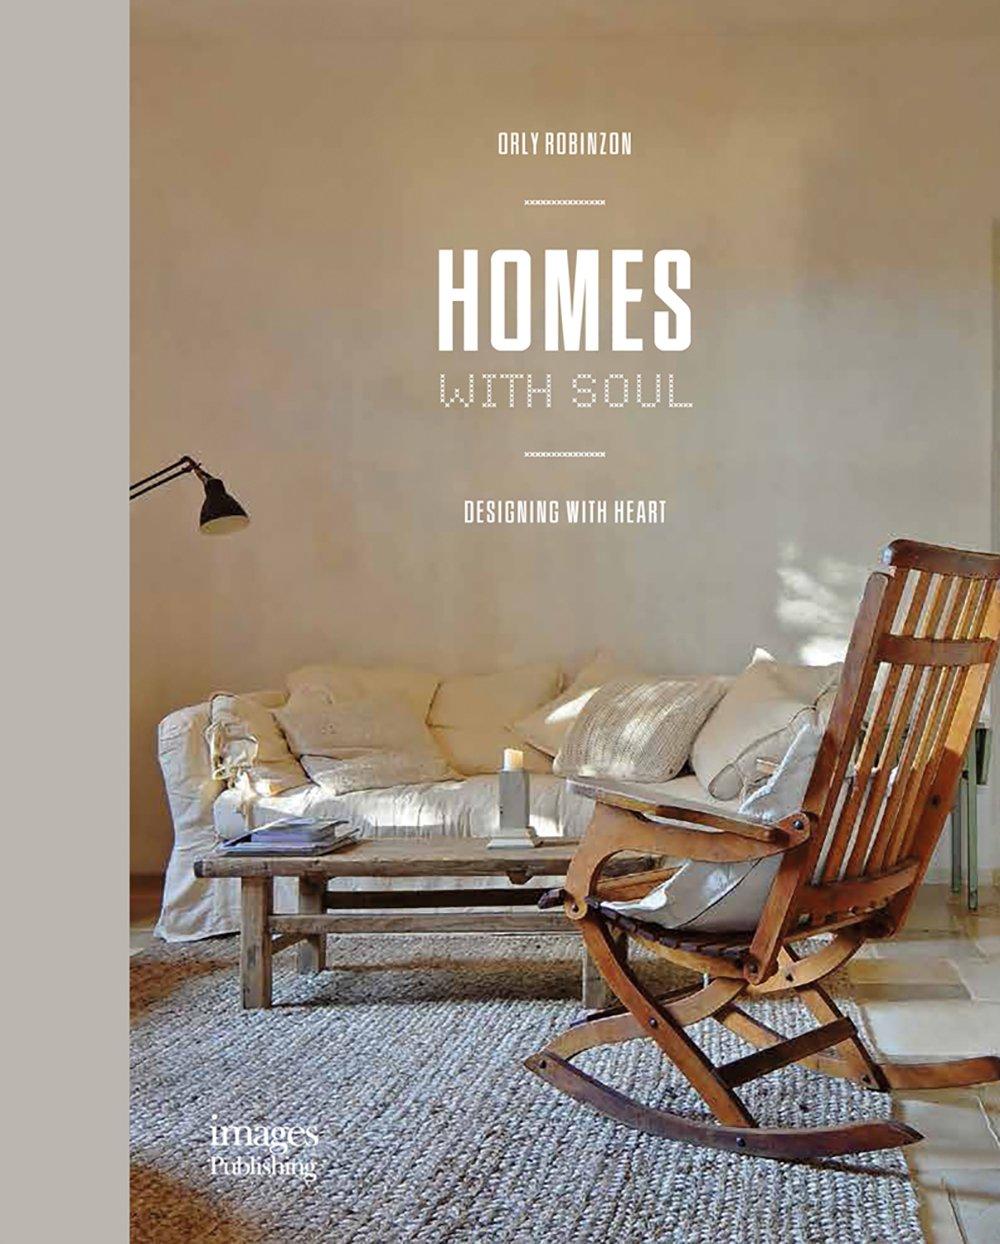 Homes with Soul. Designing with Heart